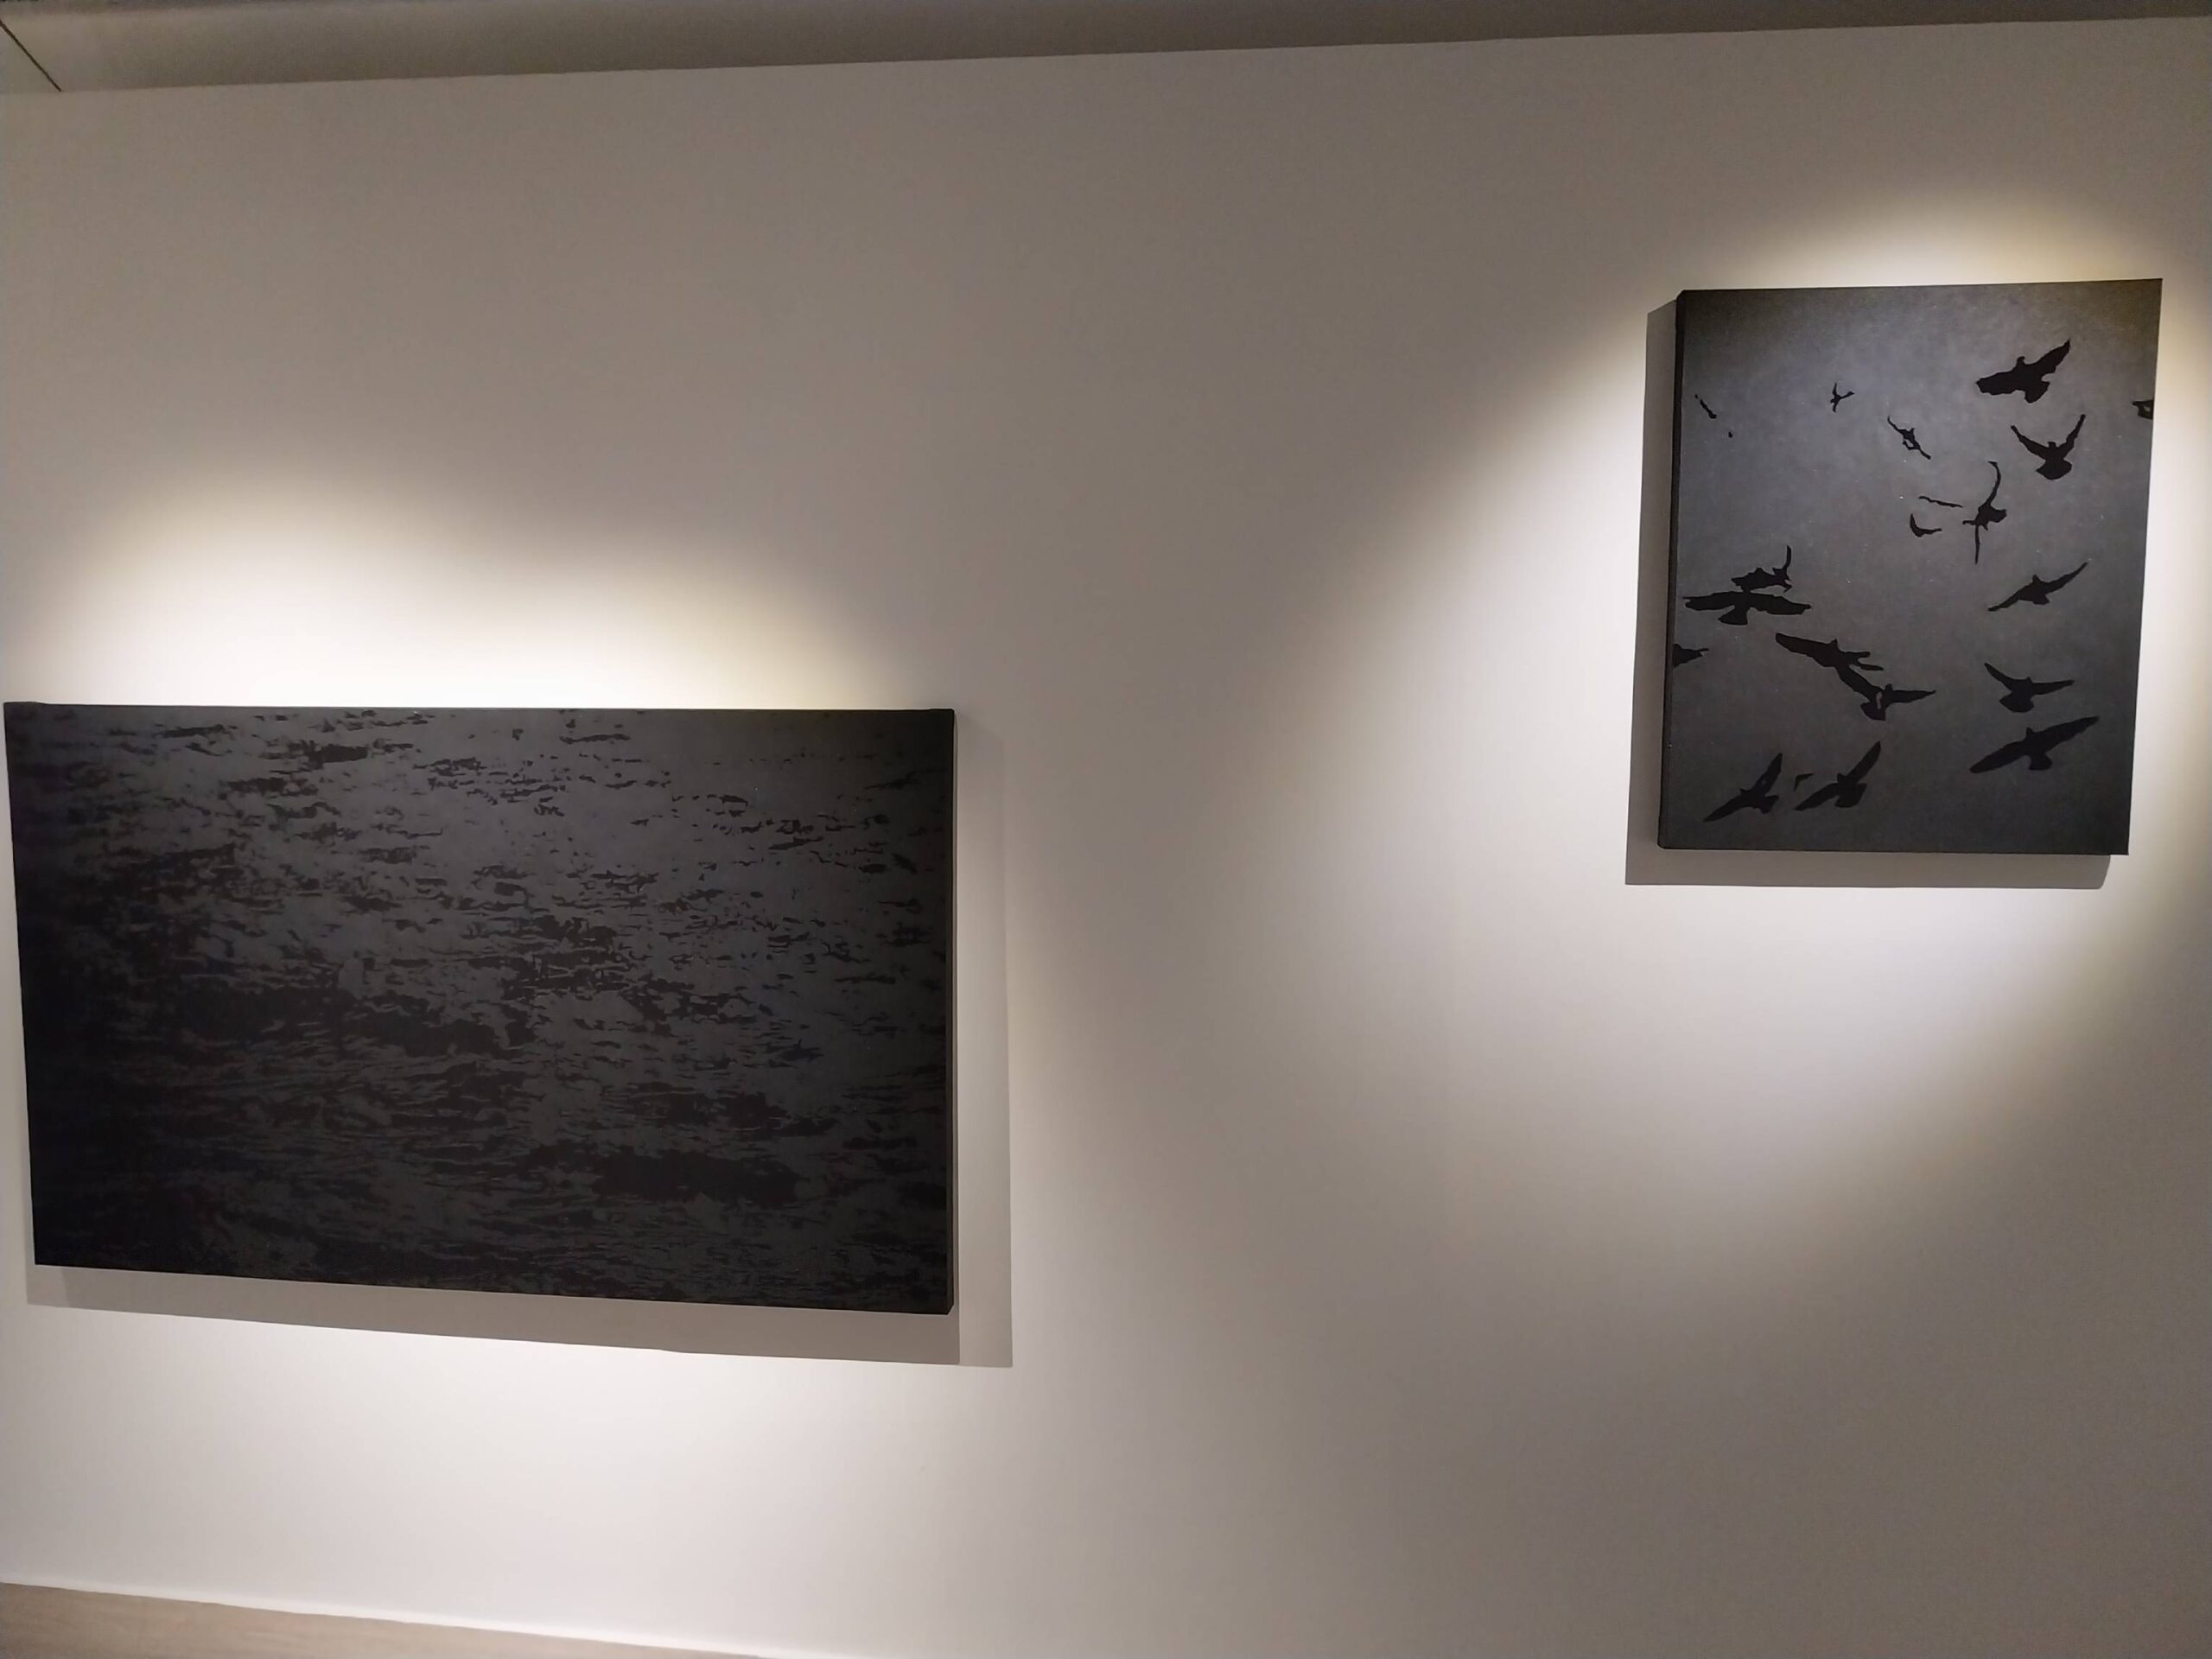 Two of the "Black Paintings" in the exhibit. Photo by Elle Yap.